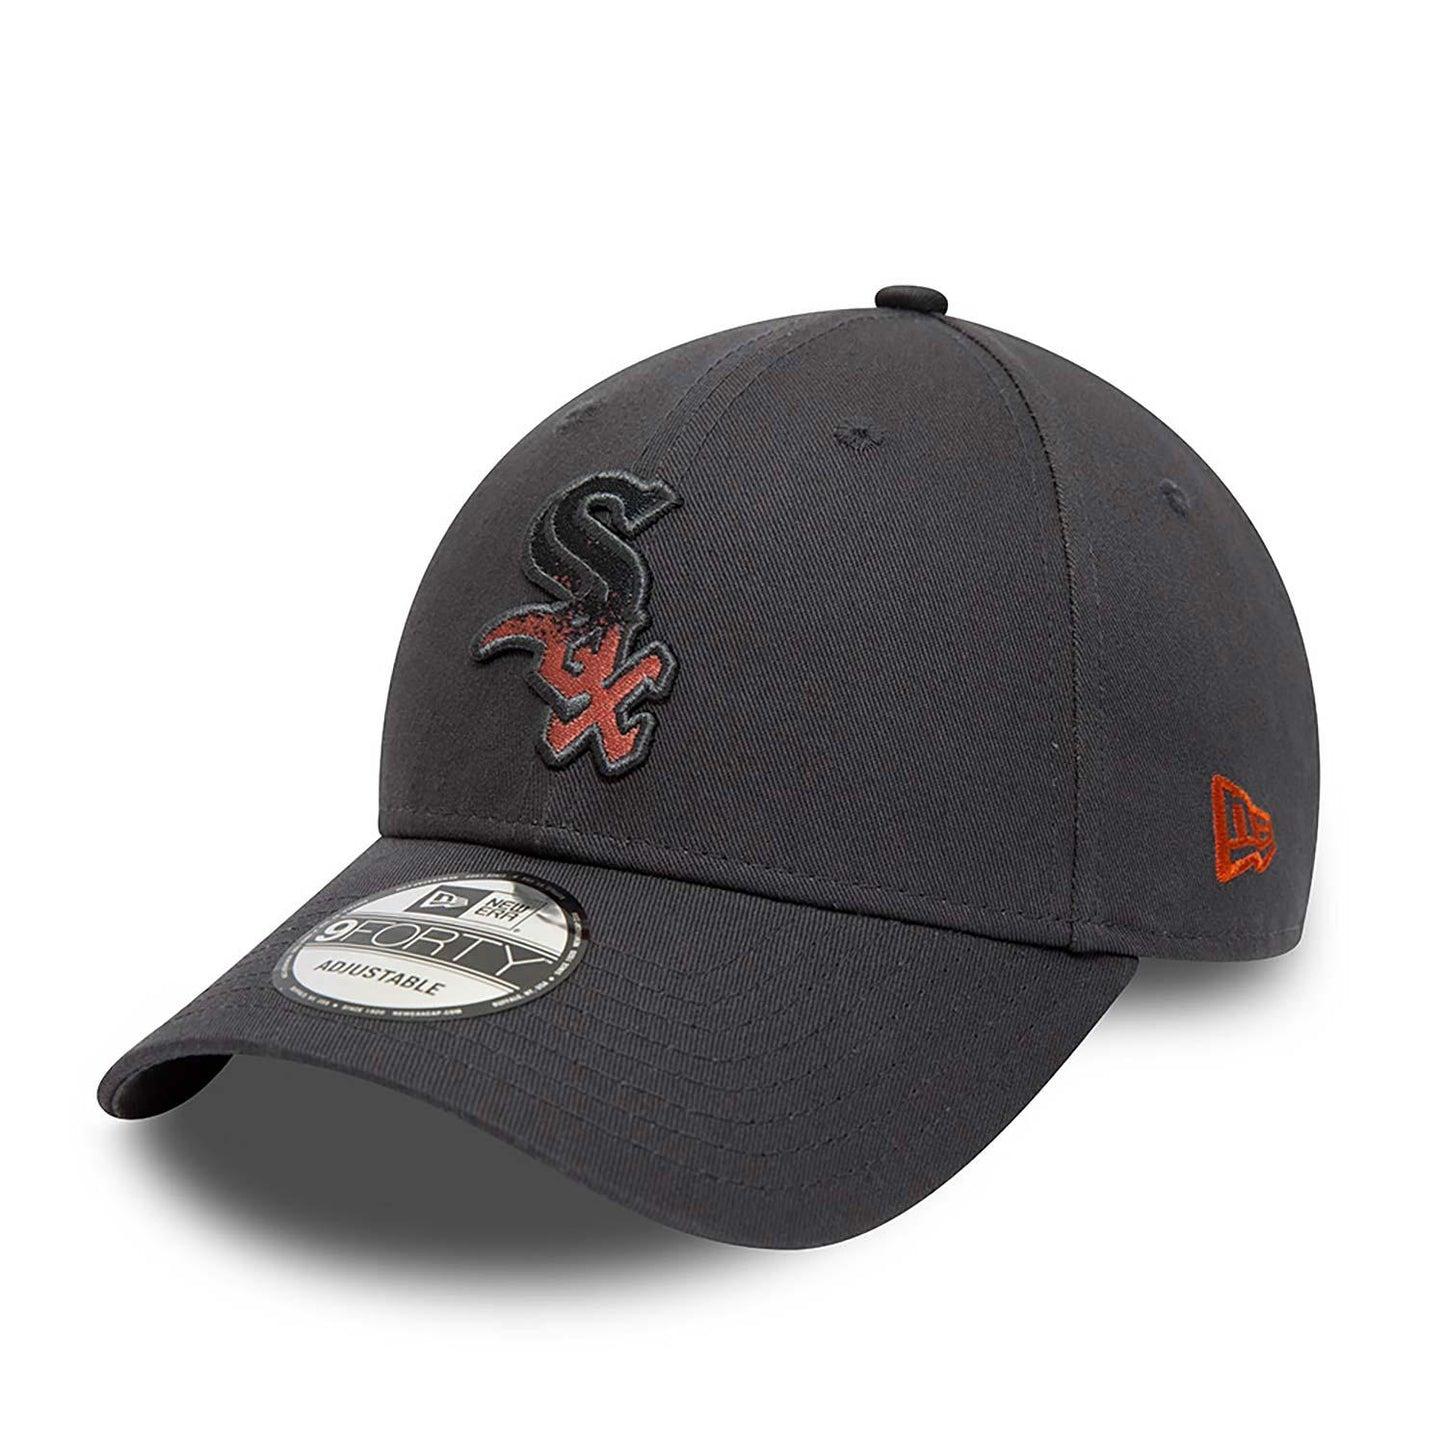 NEW ERA 9FORTY MLB INFILL CHICAGO WHITE SOX CAP